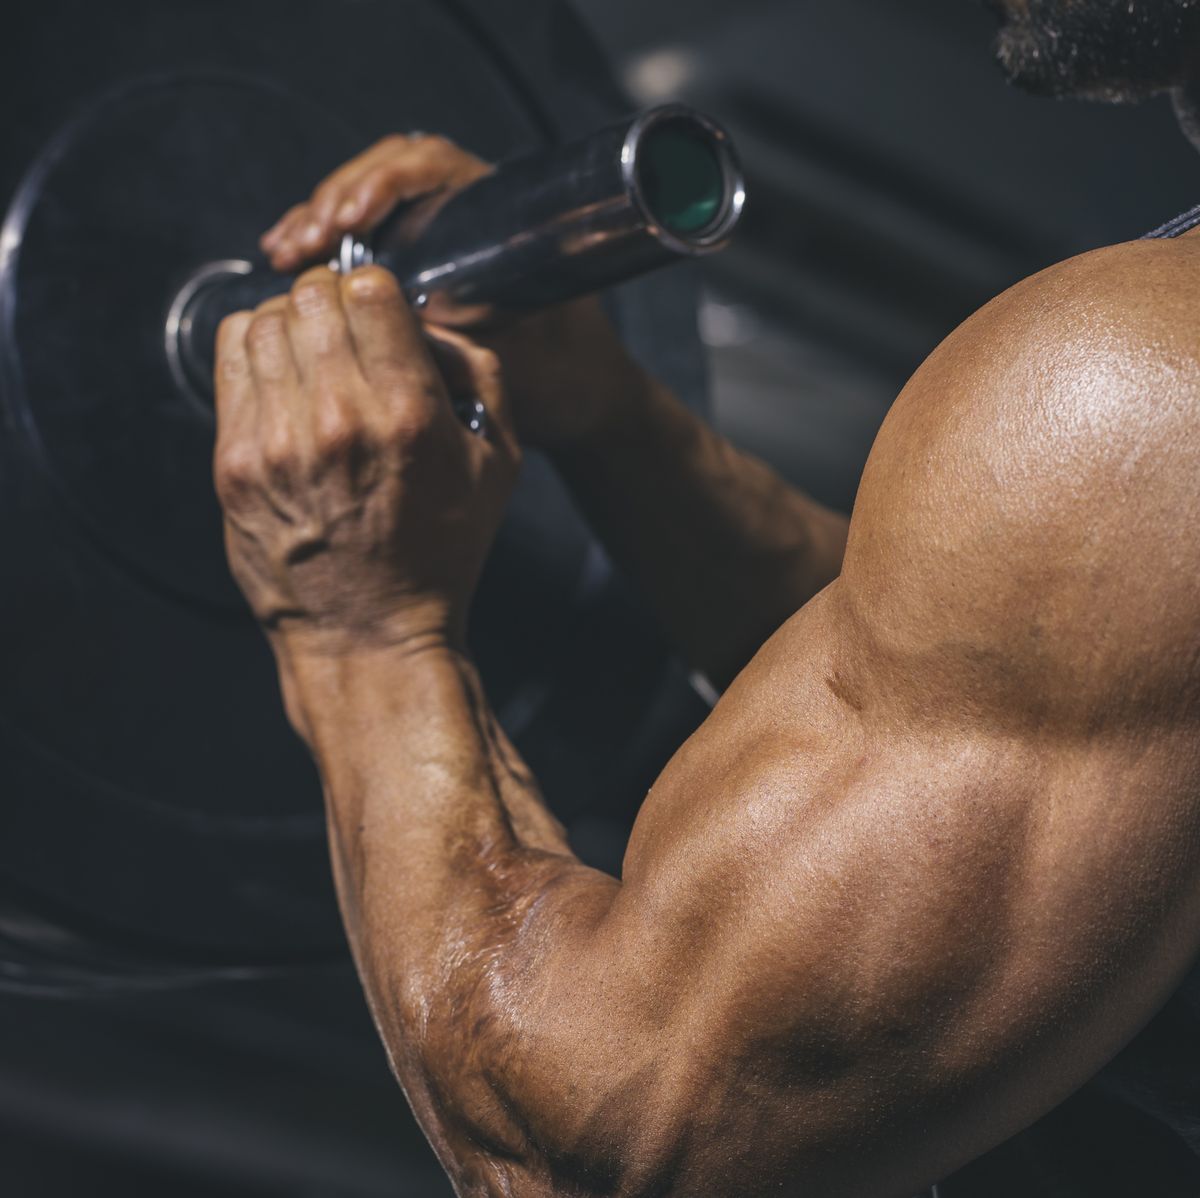 Sho-Offz Fitness & Nutrition - Want bigger arms? Triceps makes up